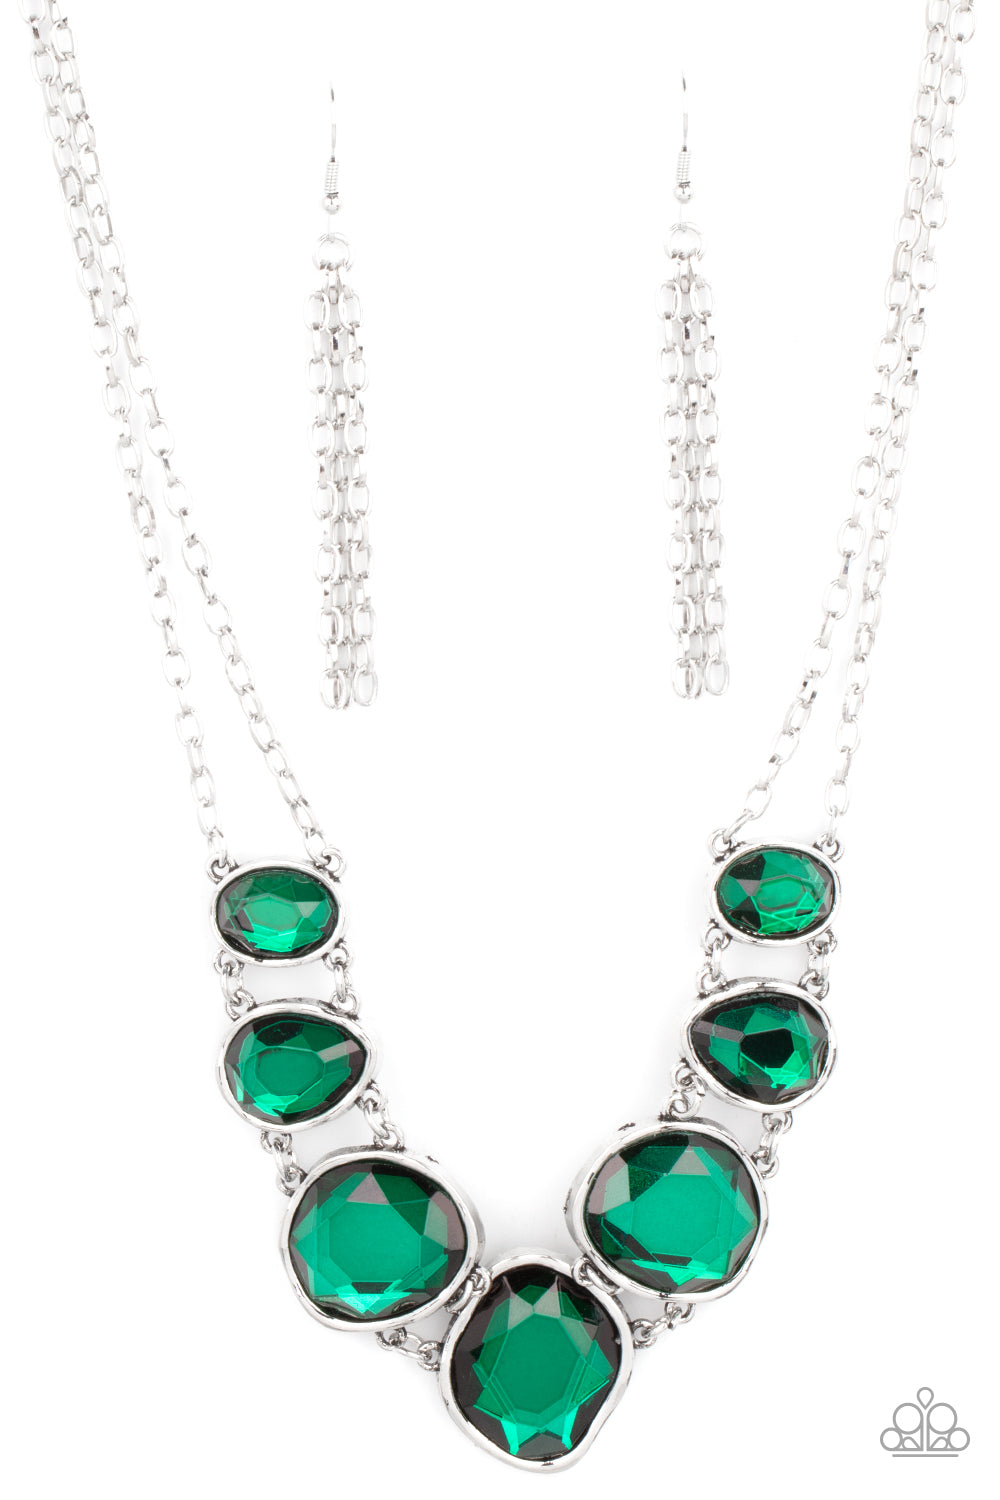 Absolute Admiration - Green Gem Necklace